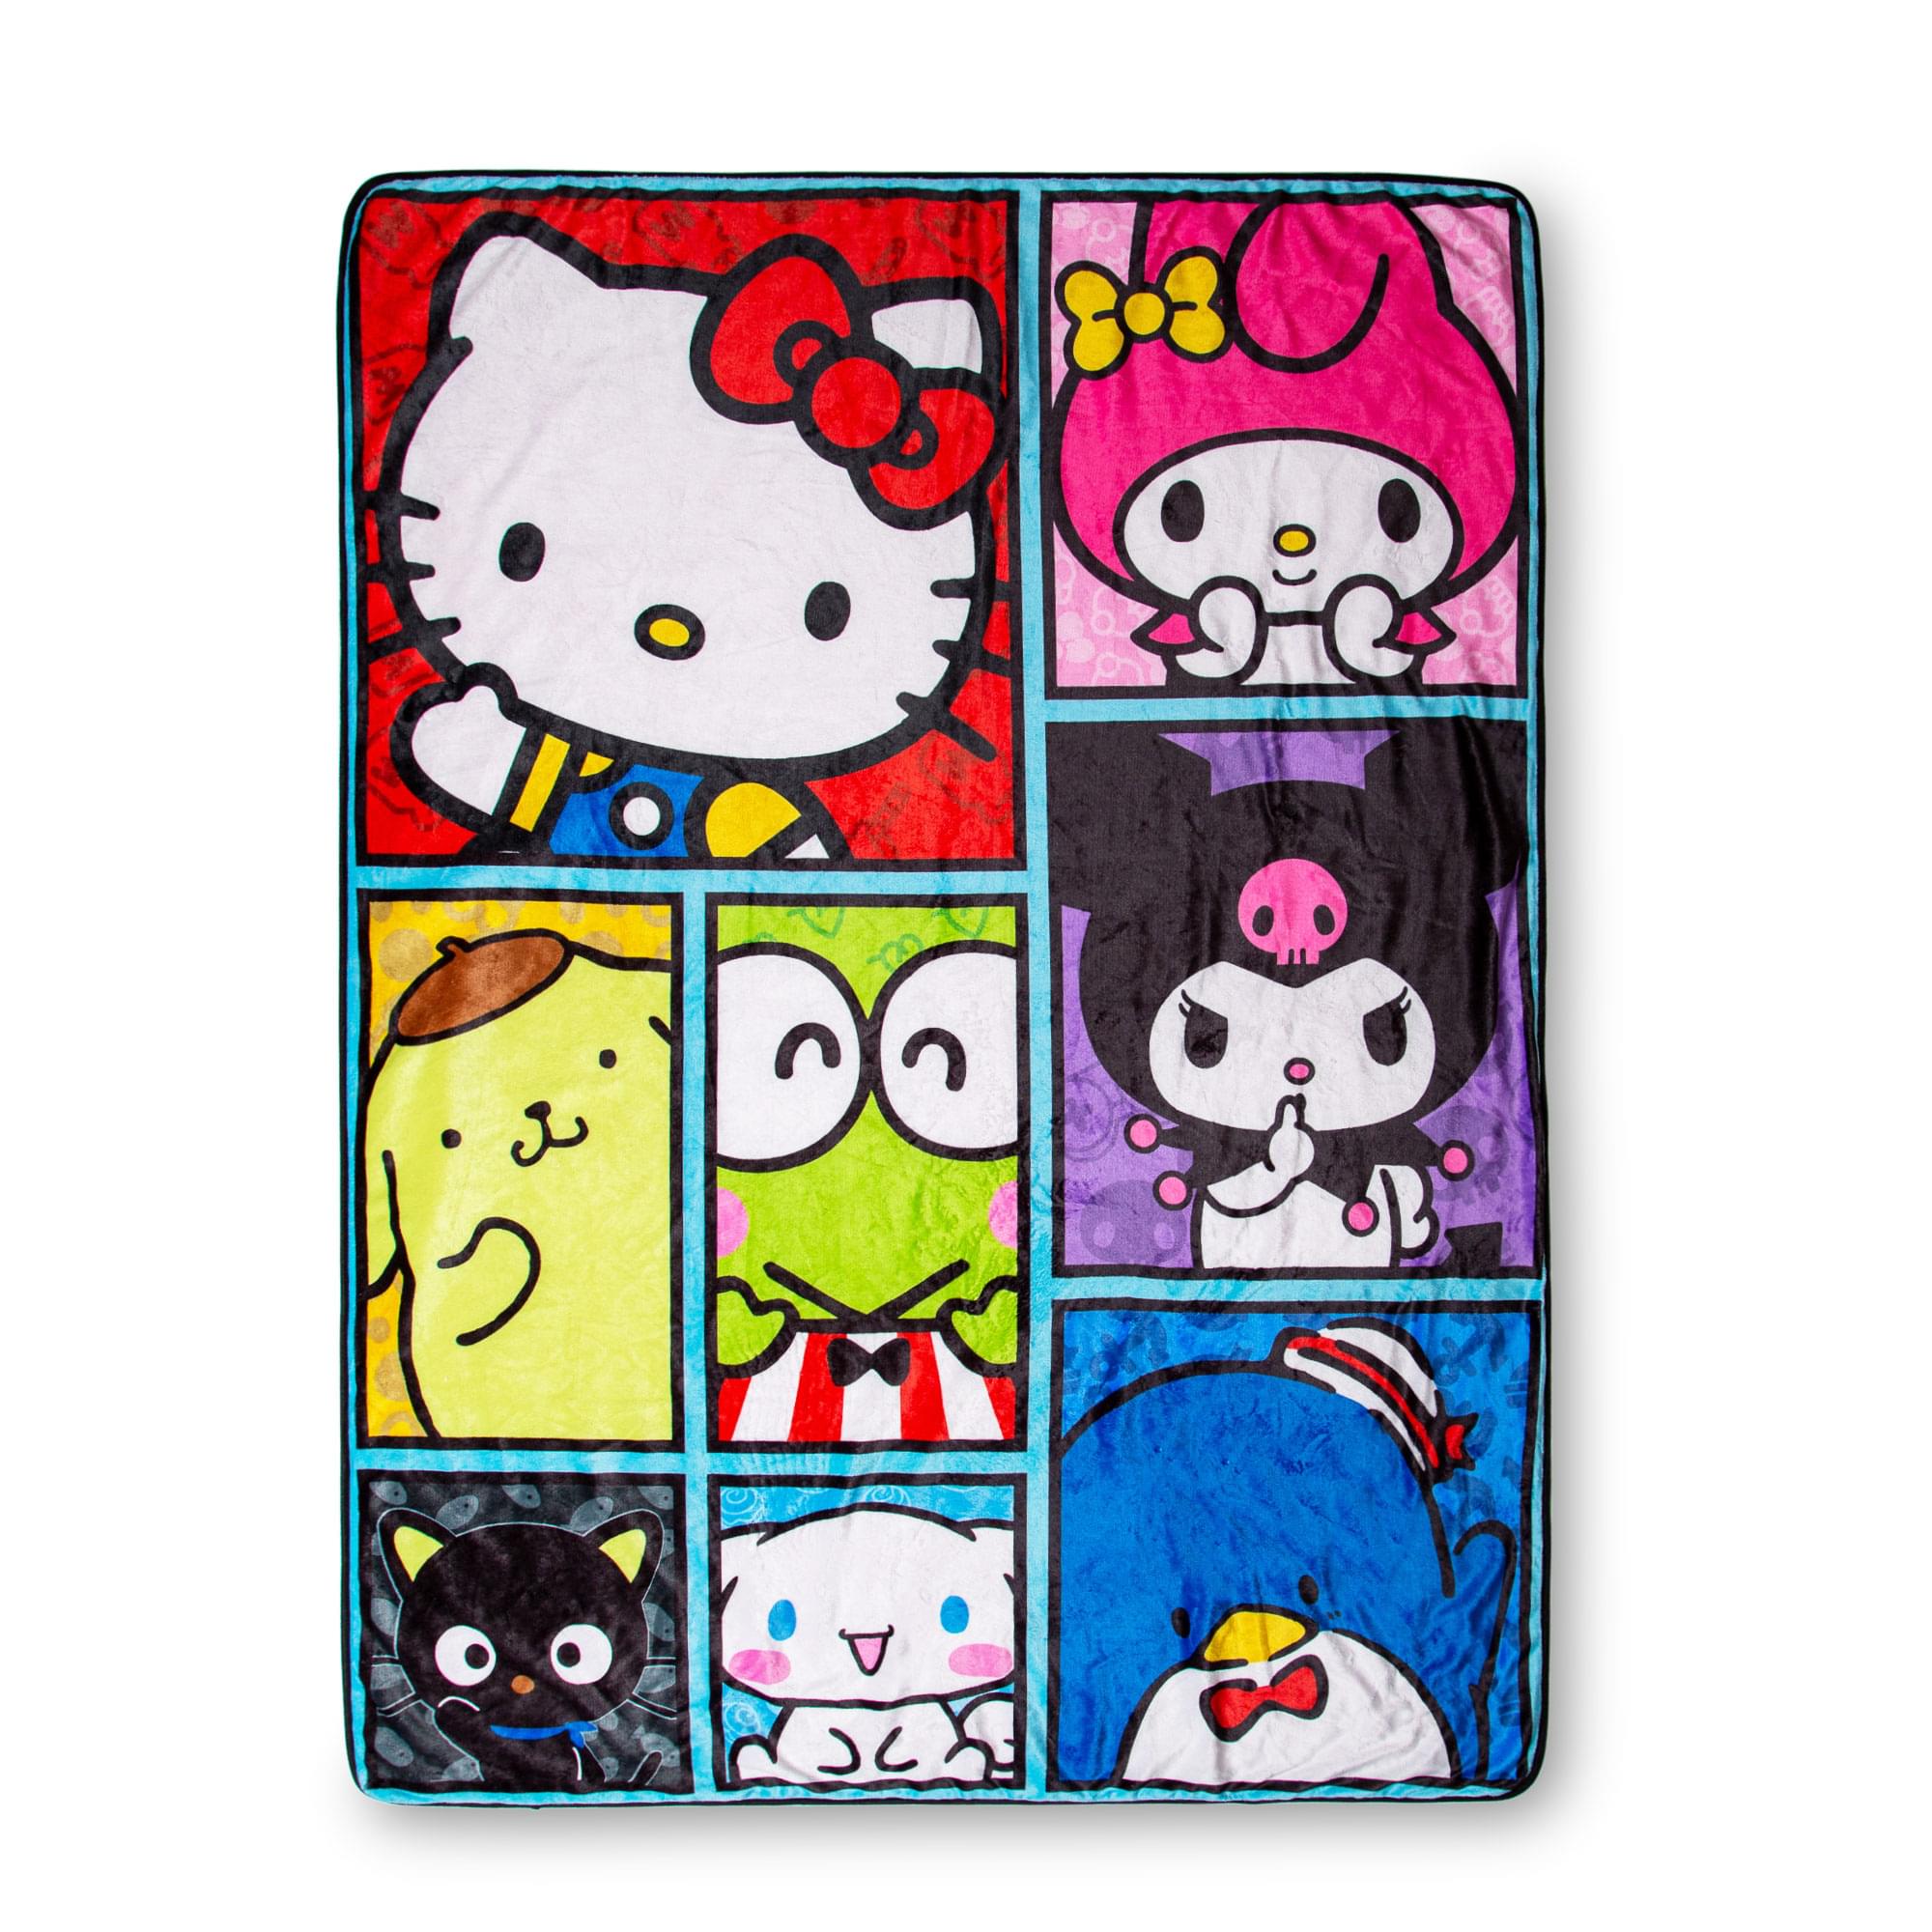 Sanrio Hello Kitty And Friends Oversized Sherpa Fleece Throw Blanket , 54 X 72 Inches